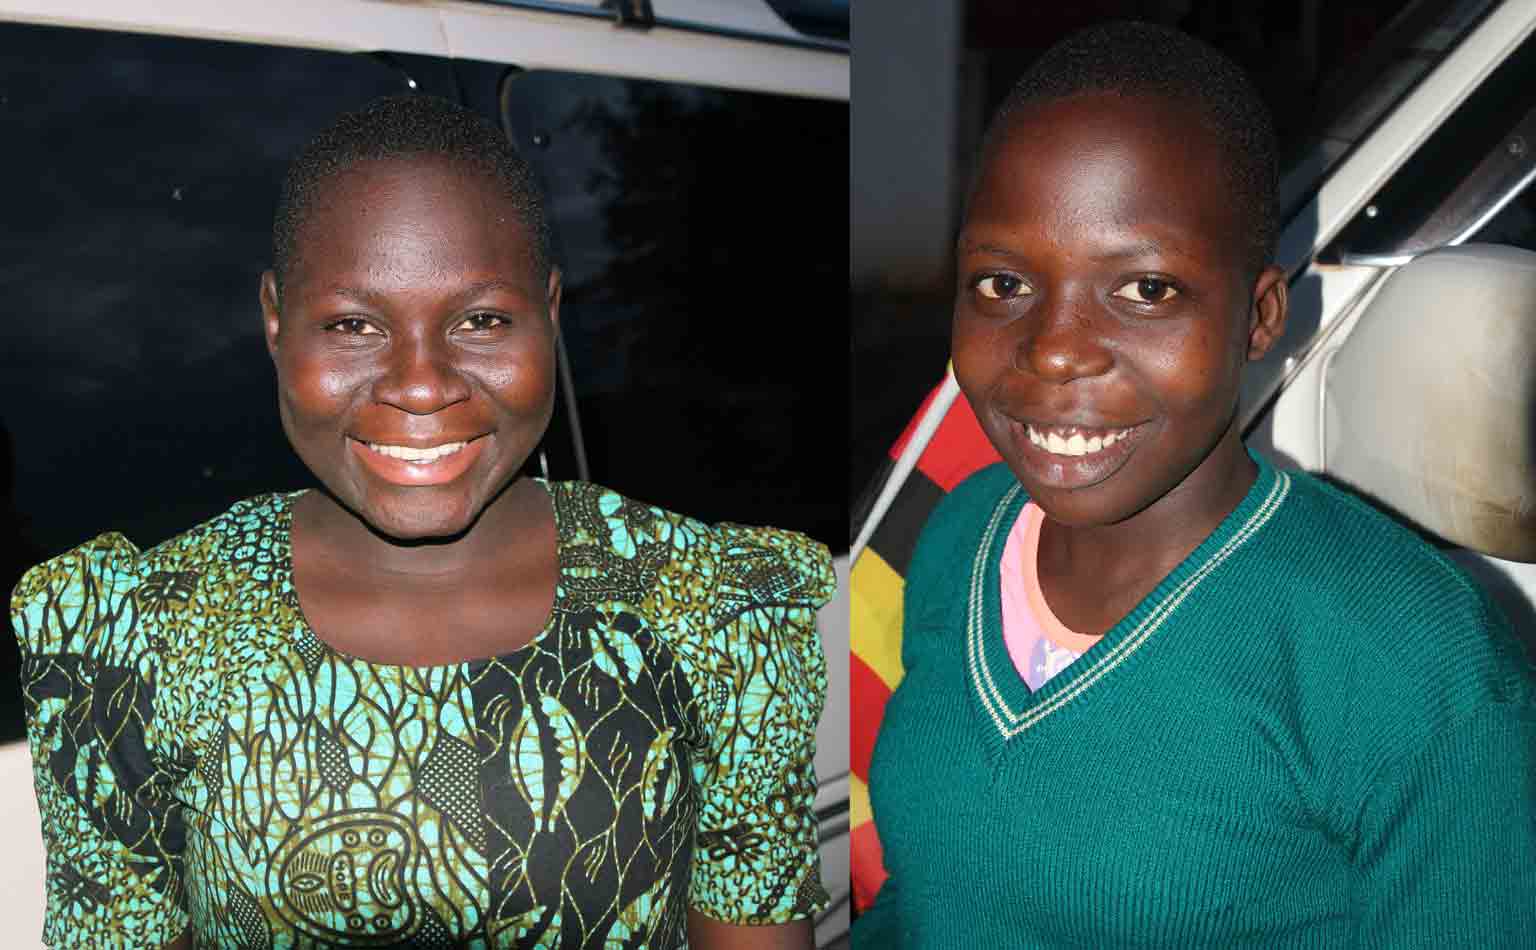 Nasira (left) and Hanifah (right) worry about their mothers, who they left behind.